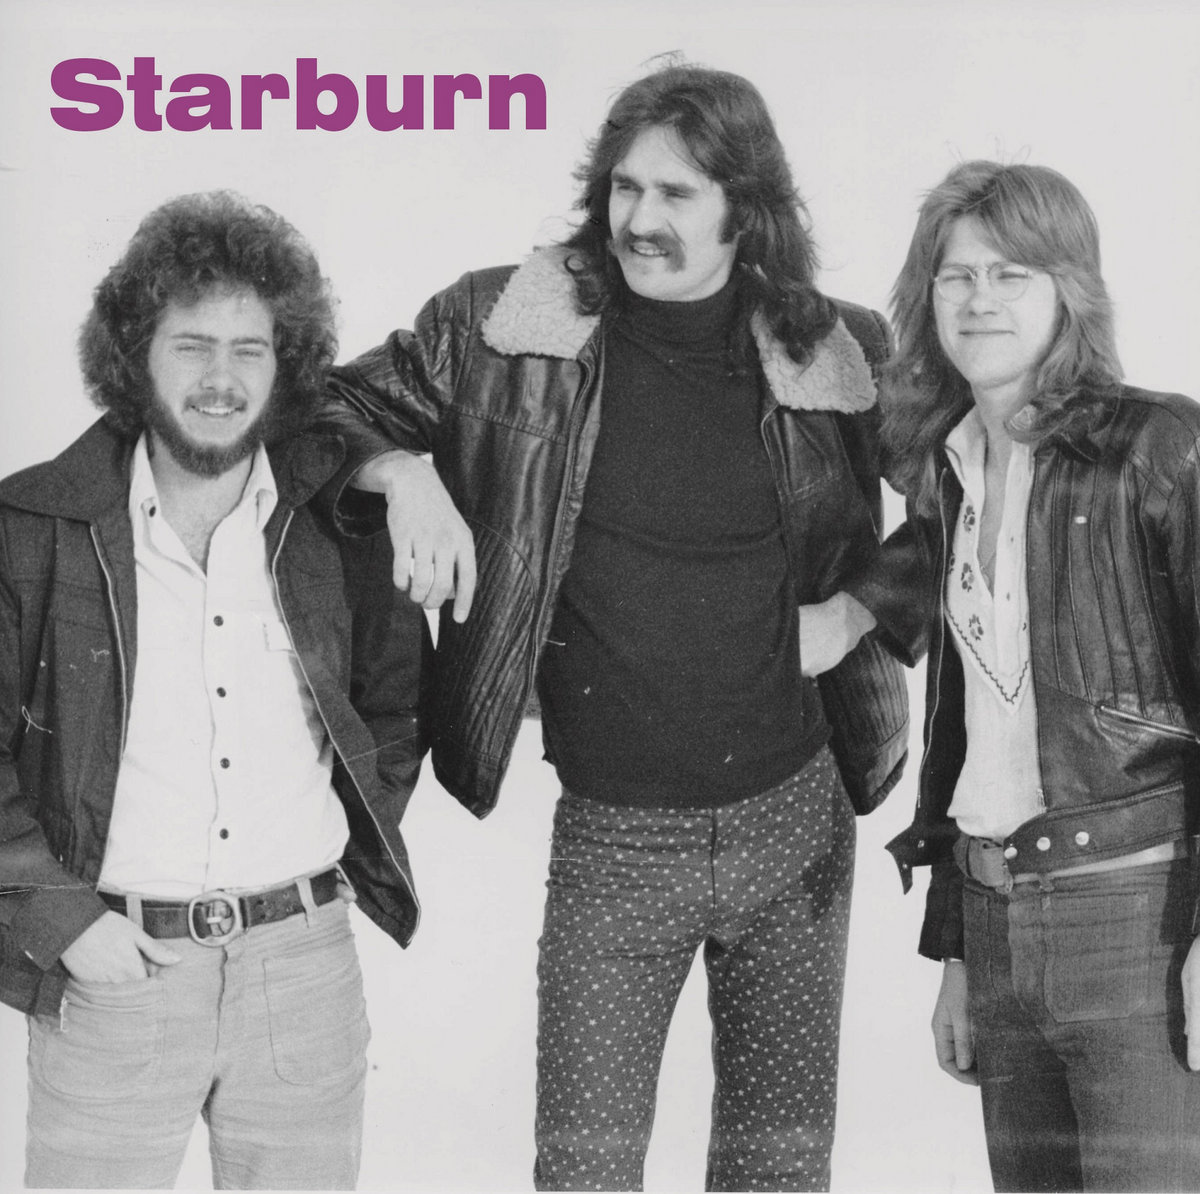 Starburn: first rock band. All songs Chelsom, Higbee and Mowbray.